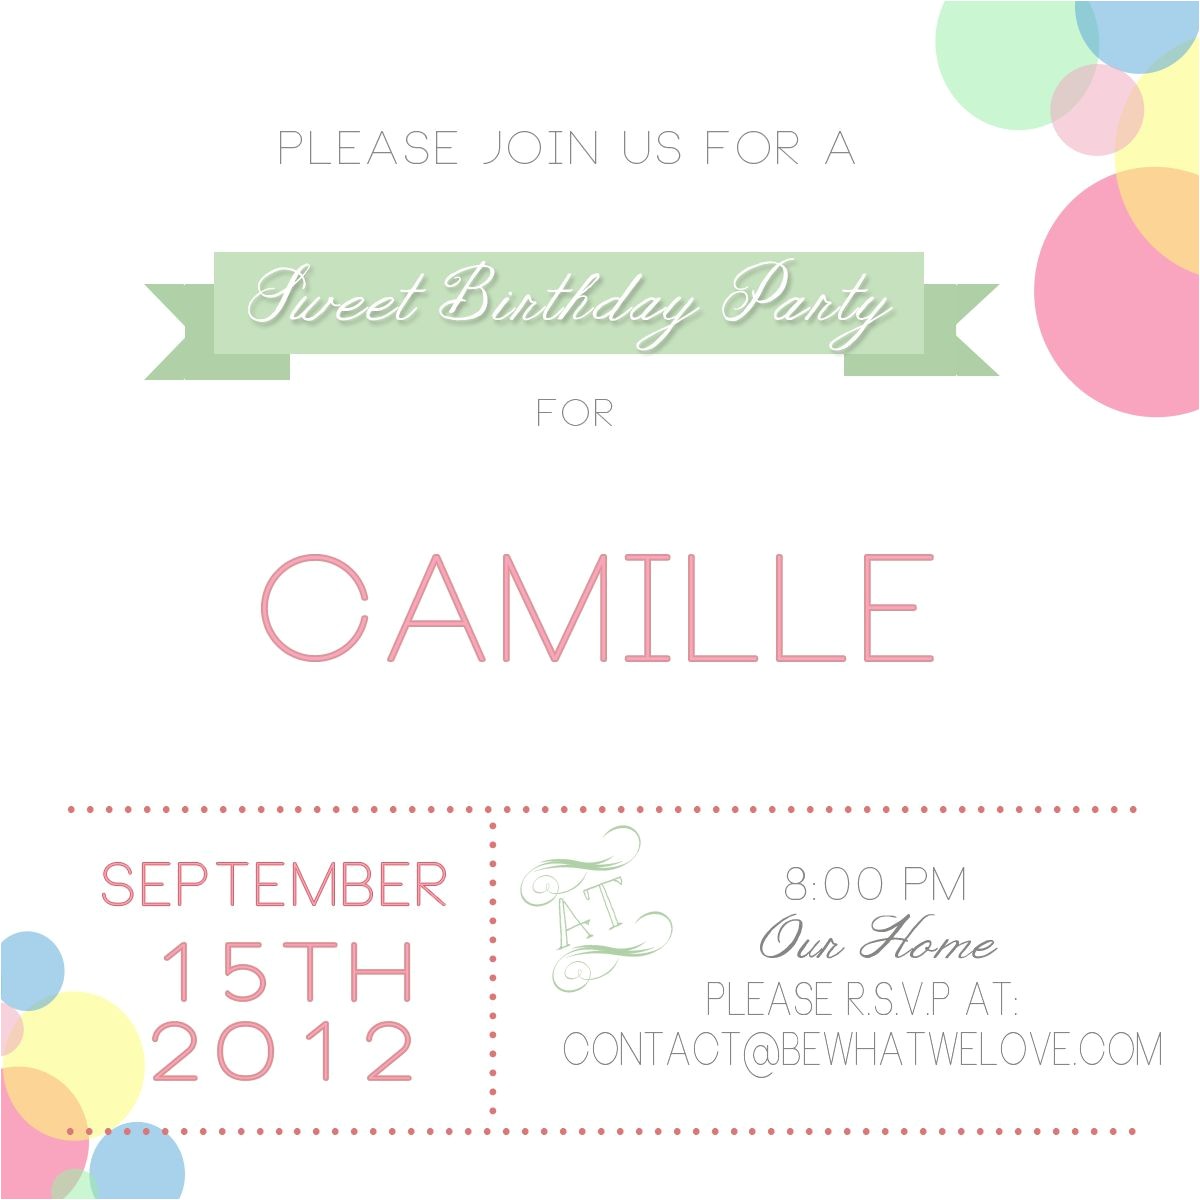 email party invitations